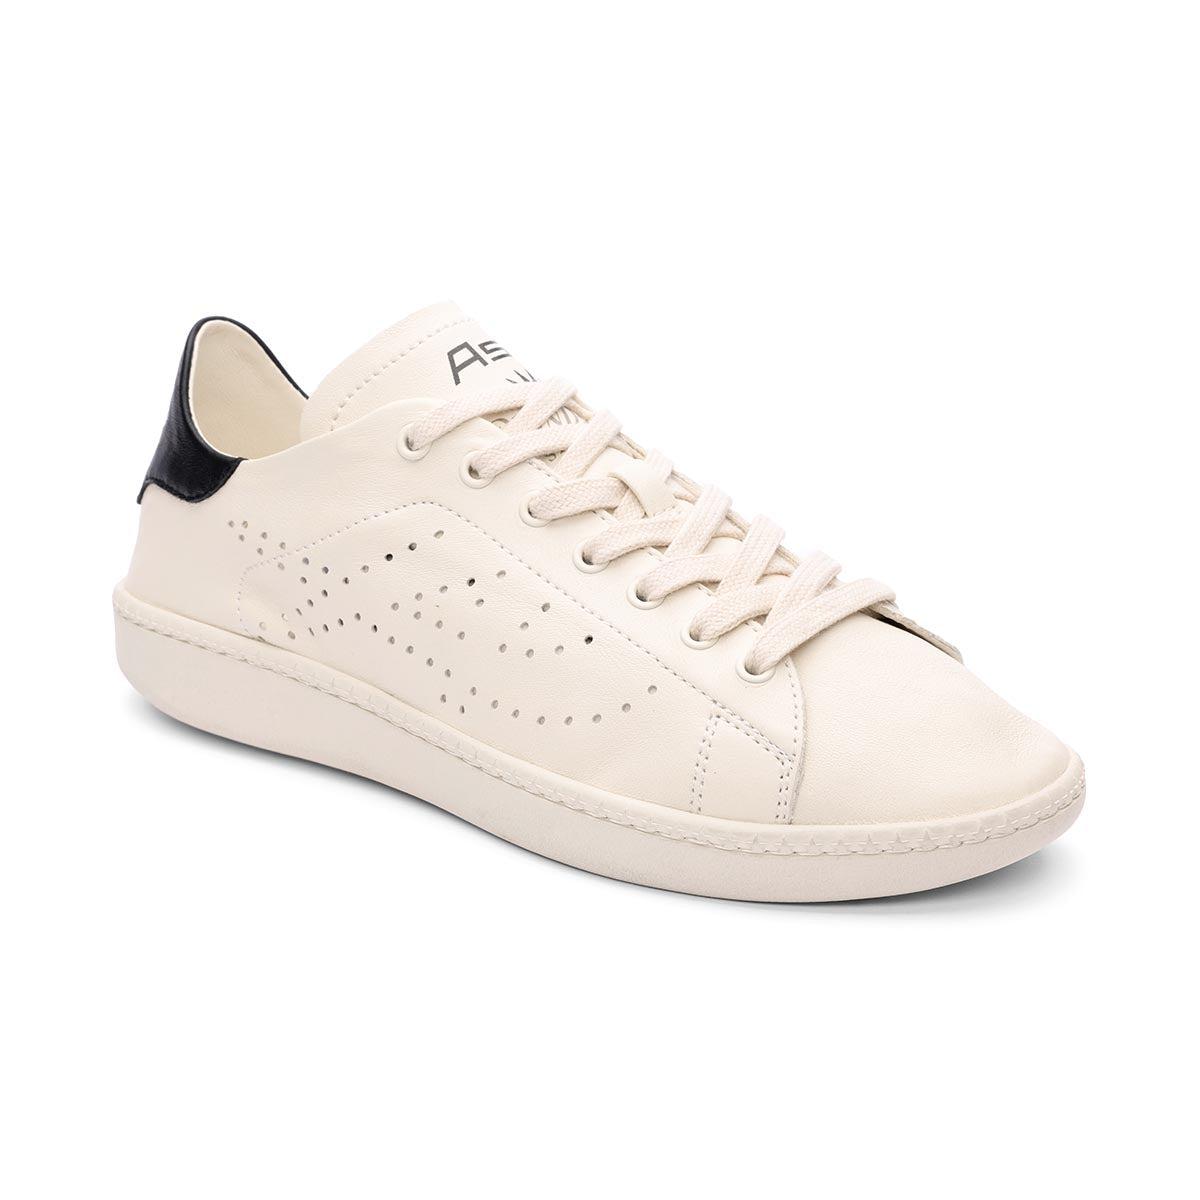 Super Unlined Leather Sneakers - White | ASH